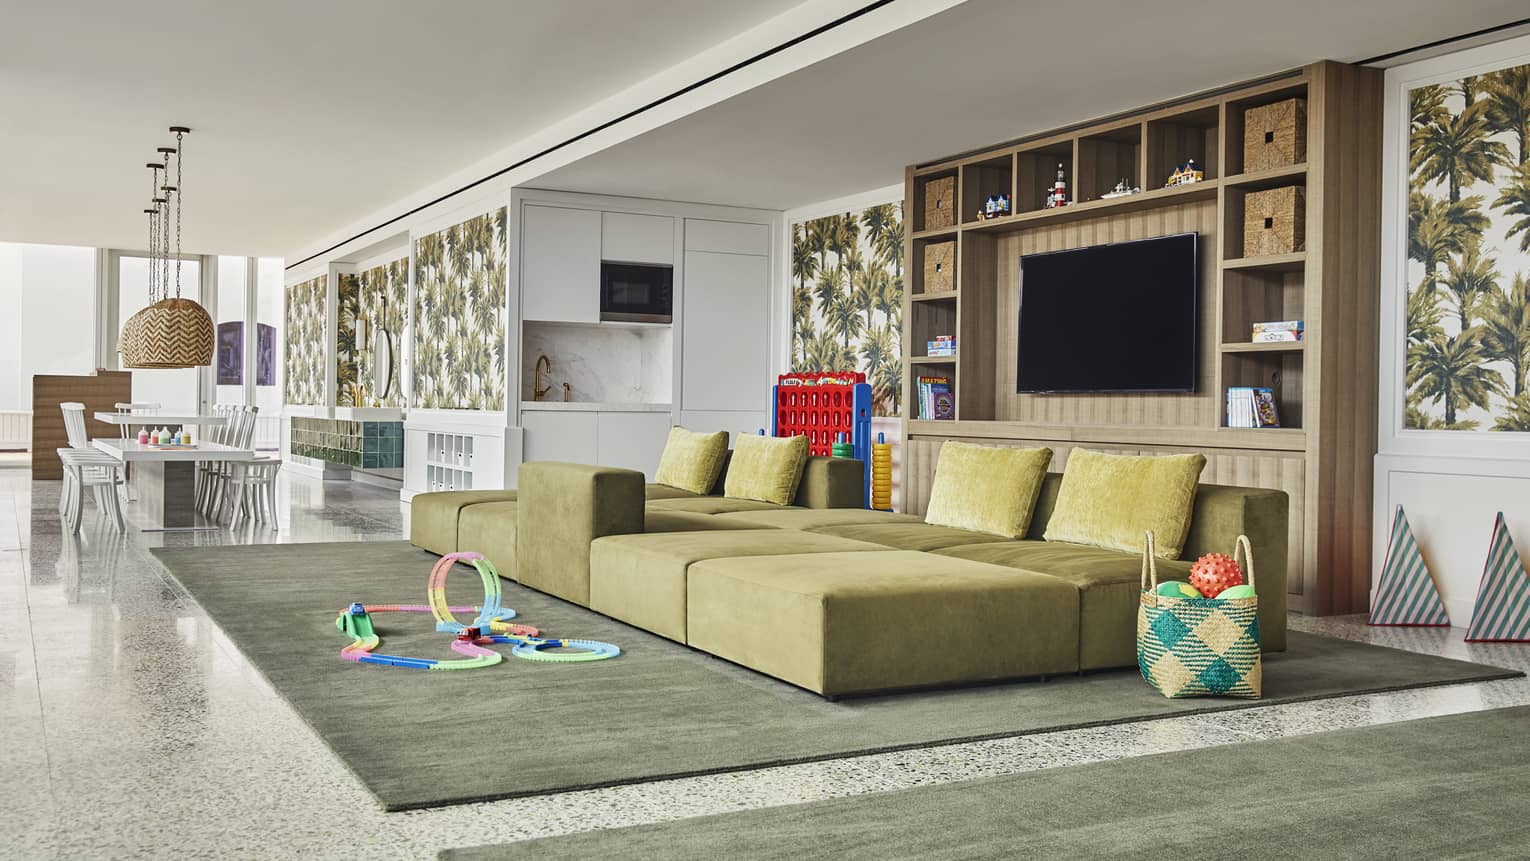 Bright kids facility with craft table, large sofa, toys and games. Specially-trained staff entertain children